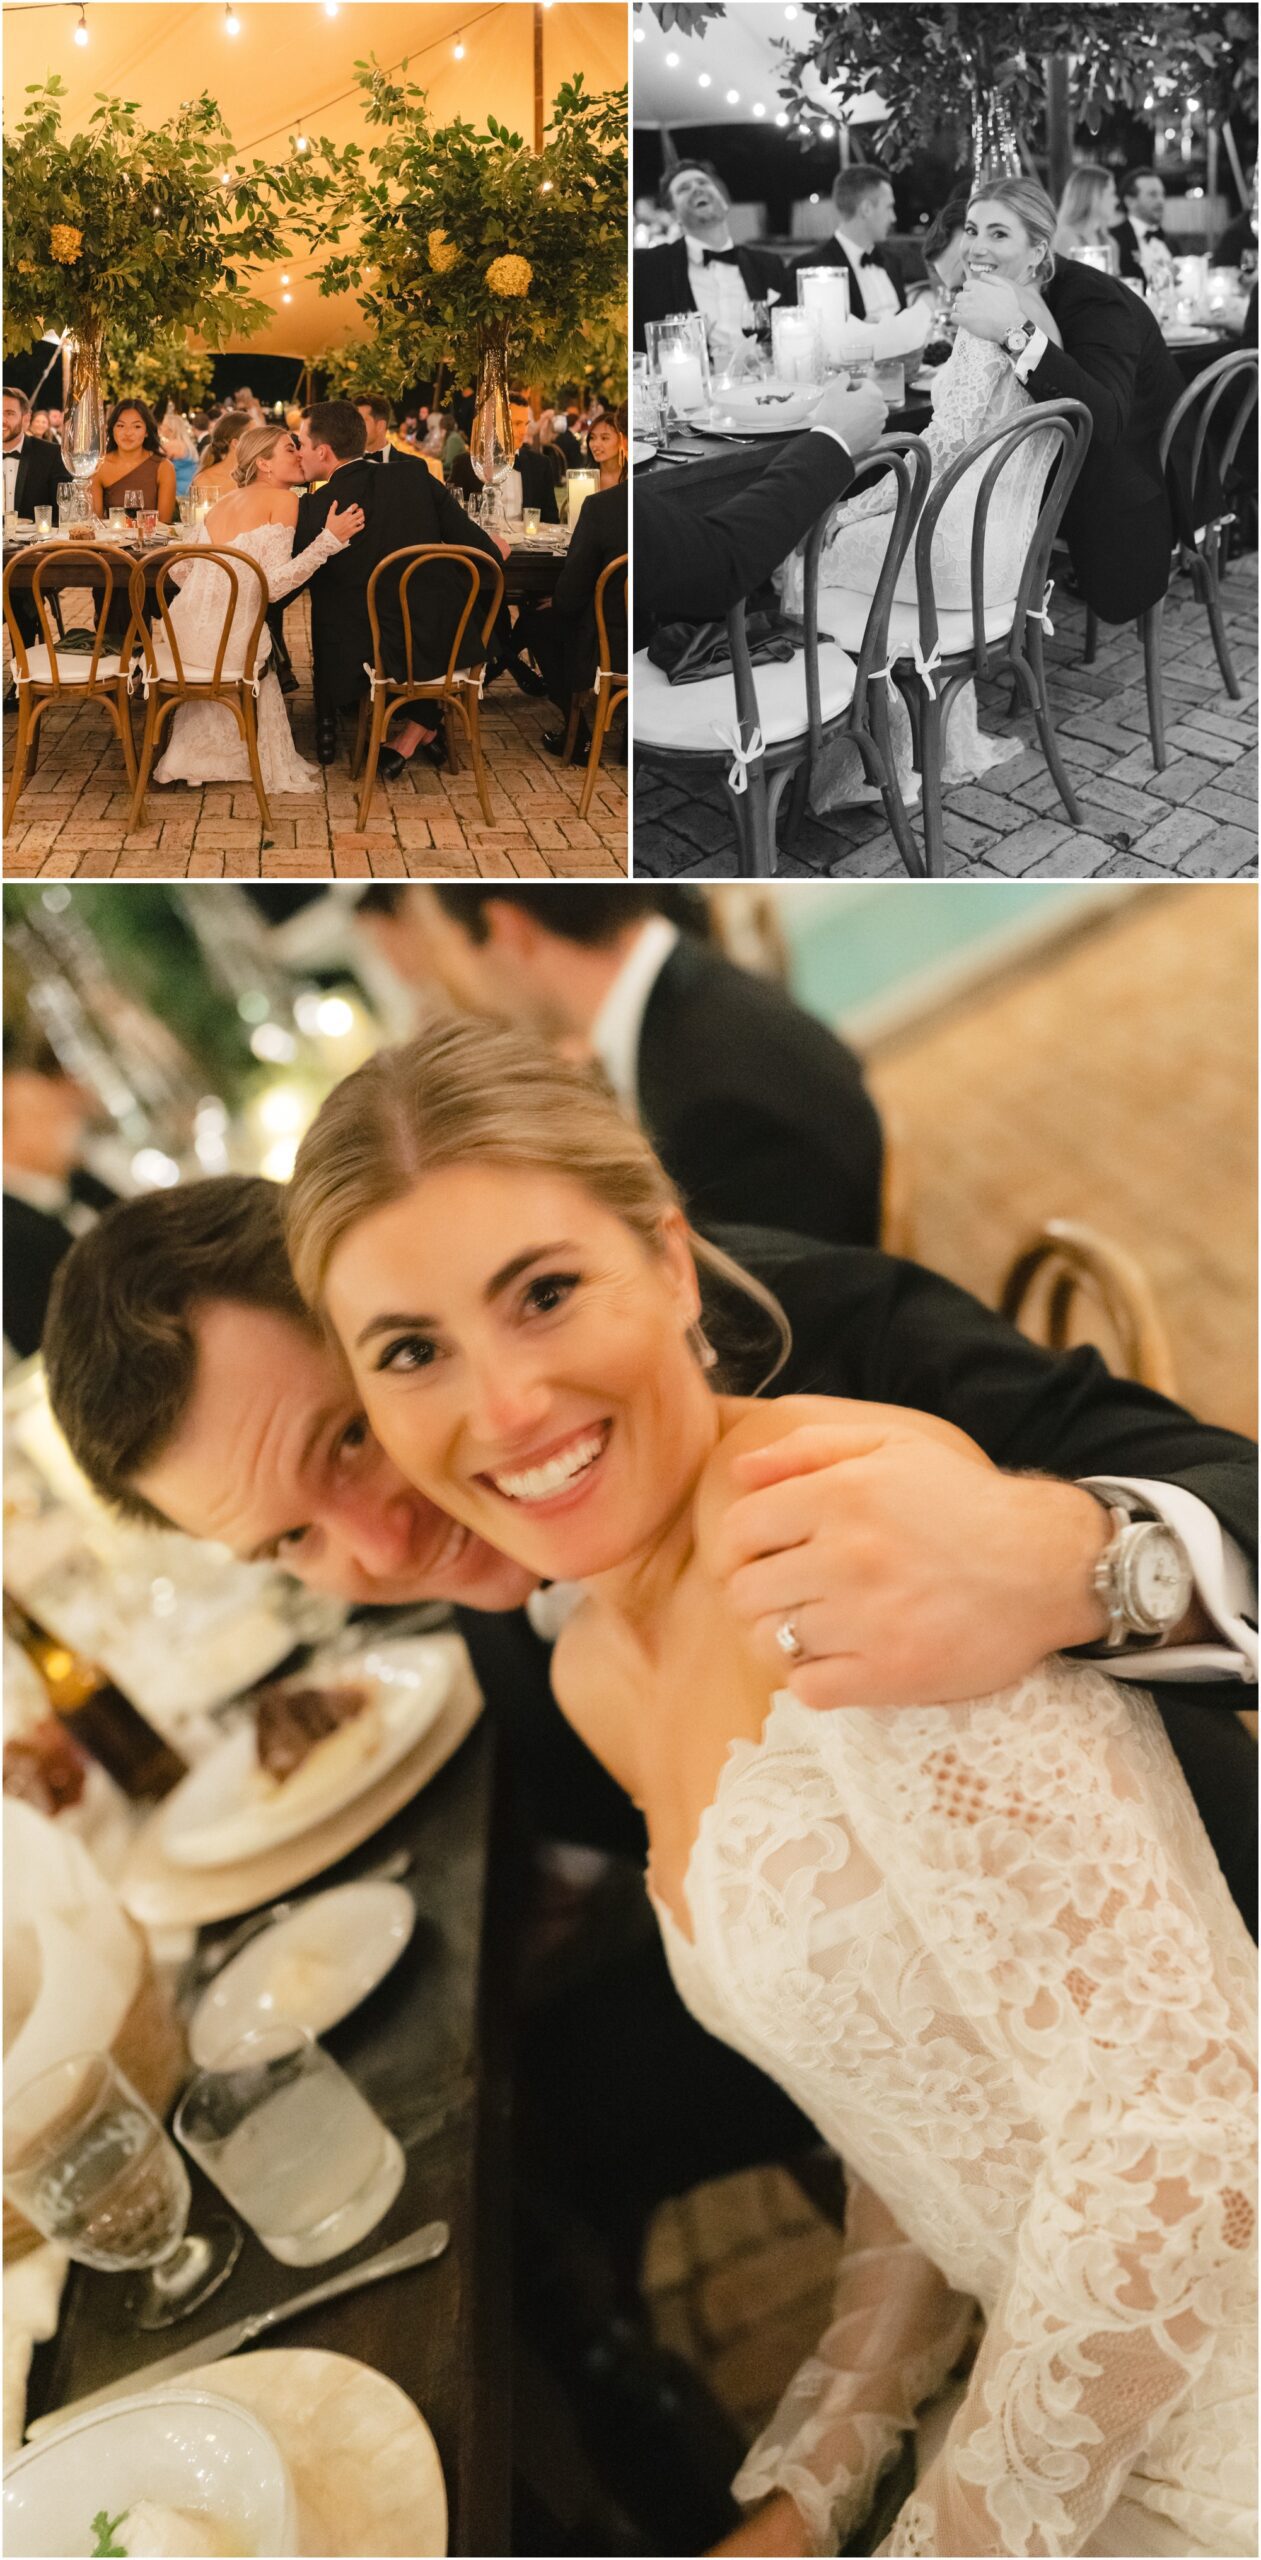 wedding reception moments at a wedding at commodore perry estate in austin texas